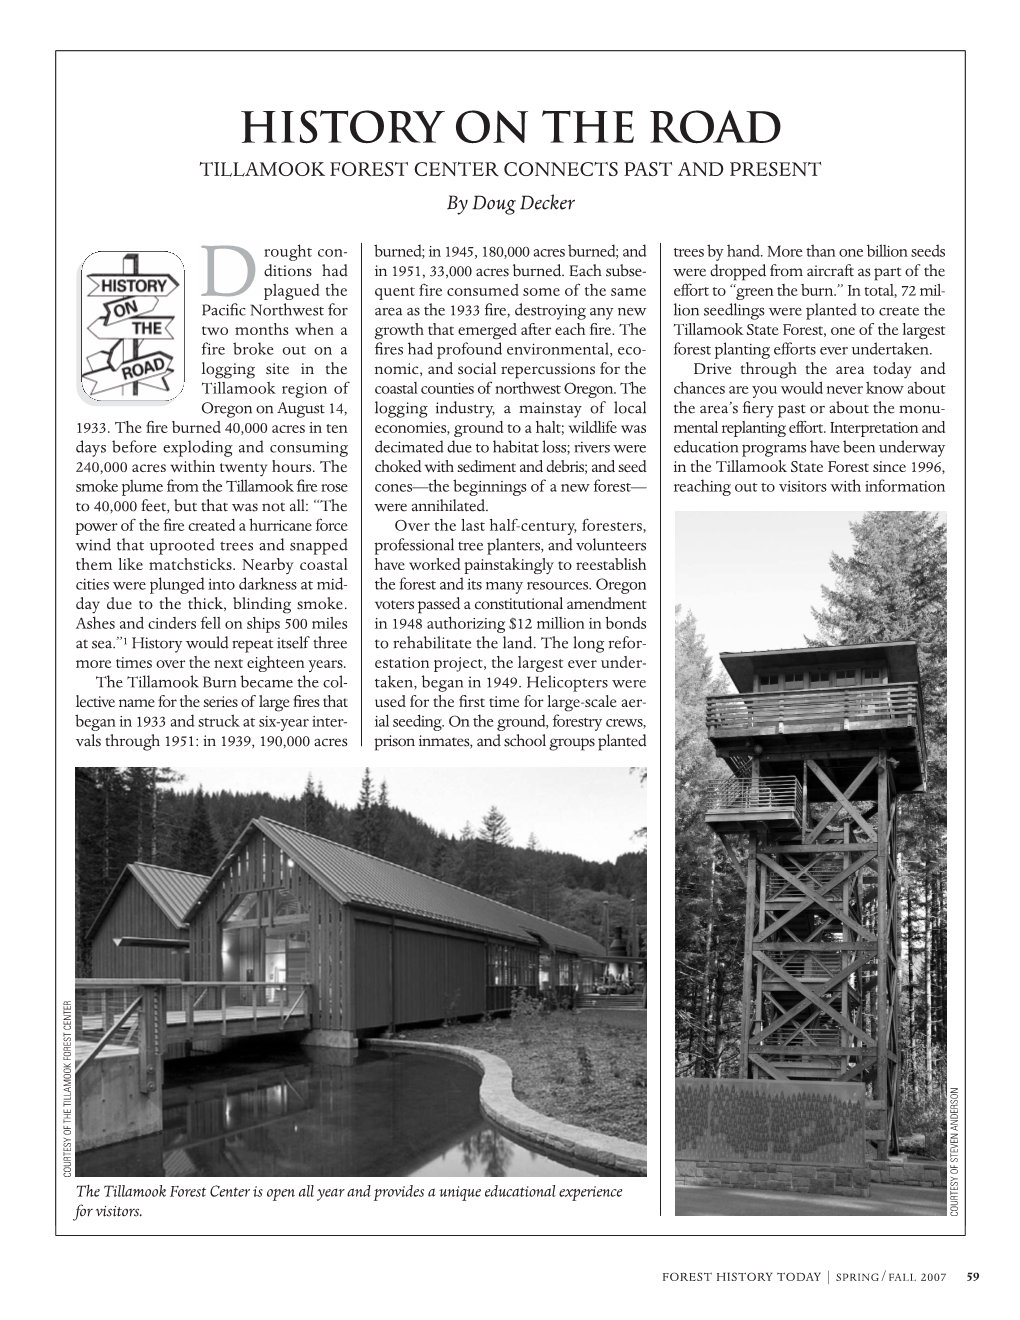 HISTORY on the ROAD TILLAMOOK FOREST CENTER CONNECTS PAST and PRESENT by Doug Decker